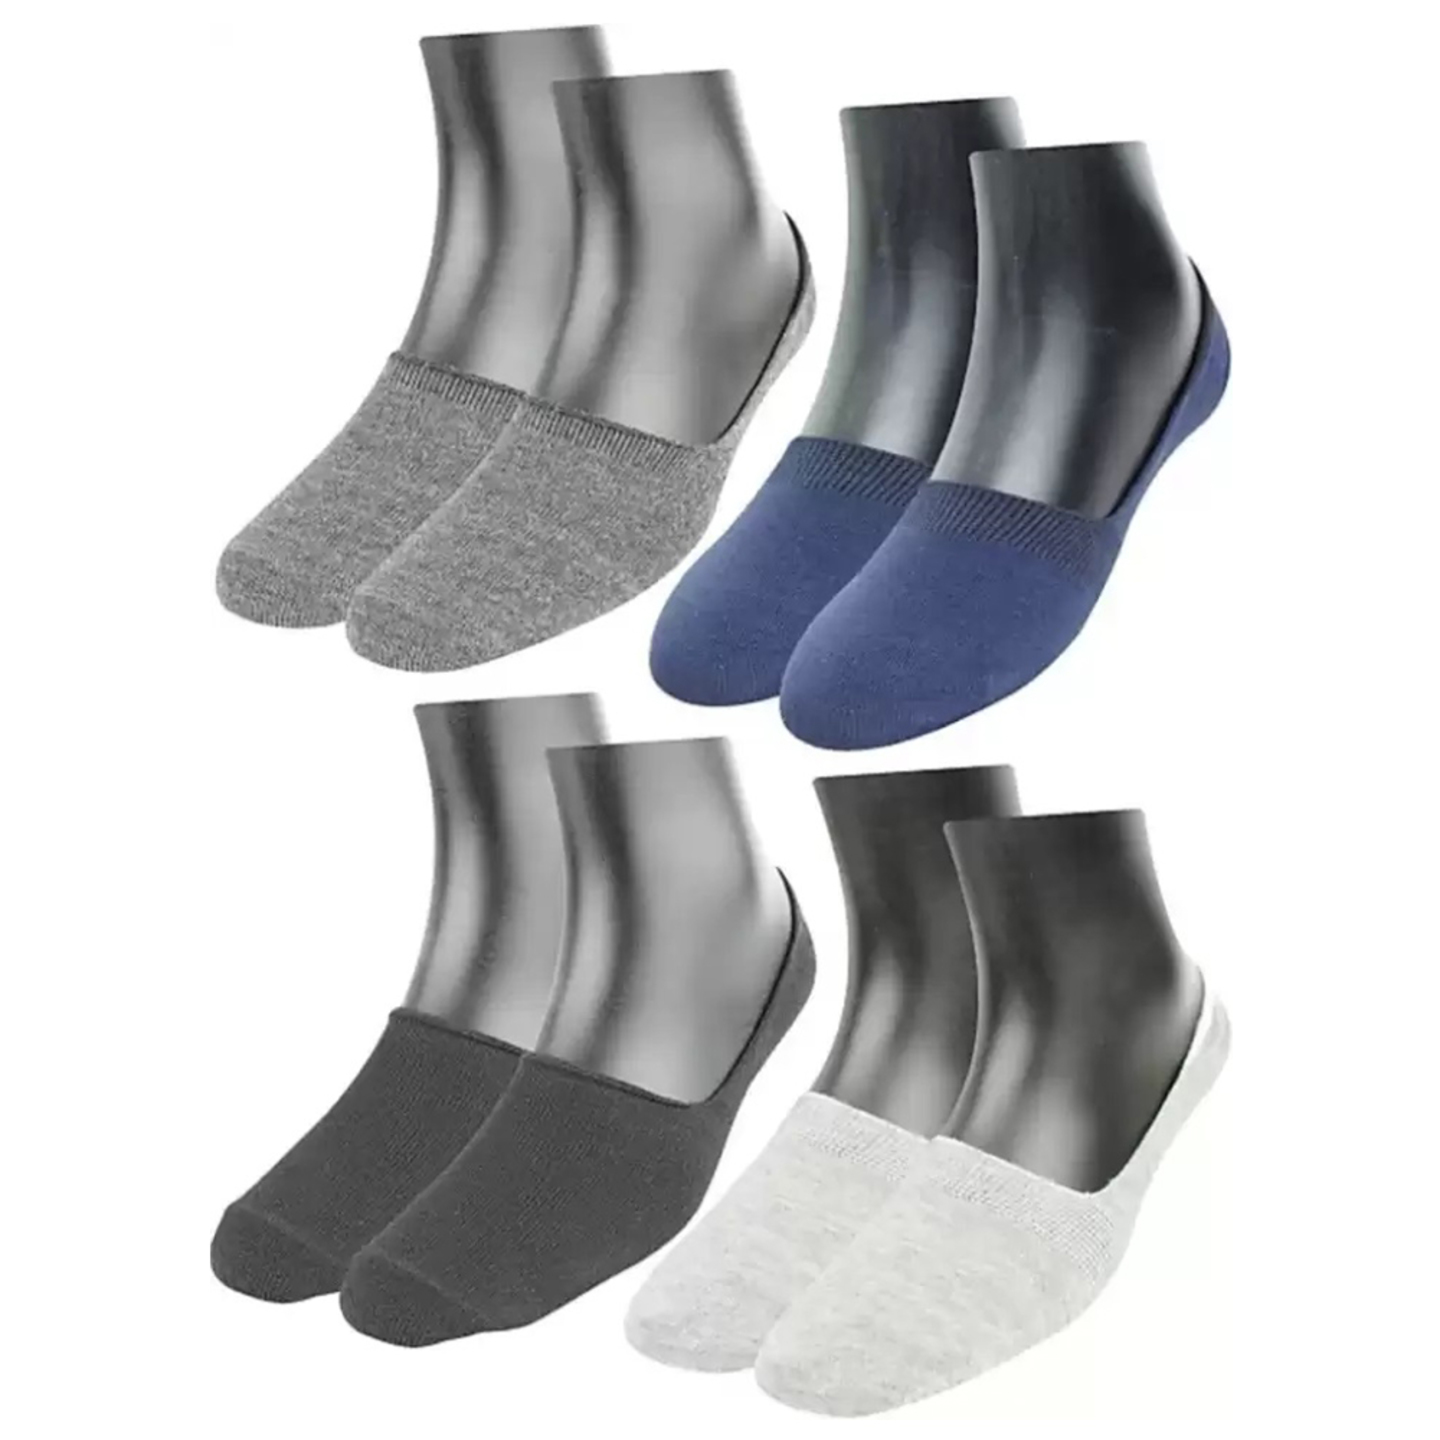 Solid PedsFootieNo-Show socks for Men